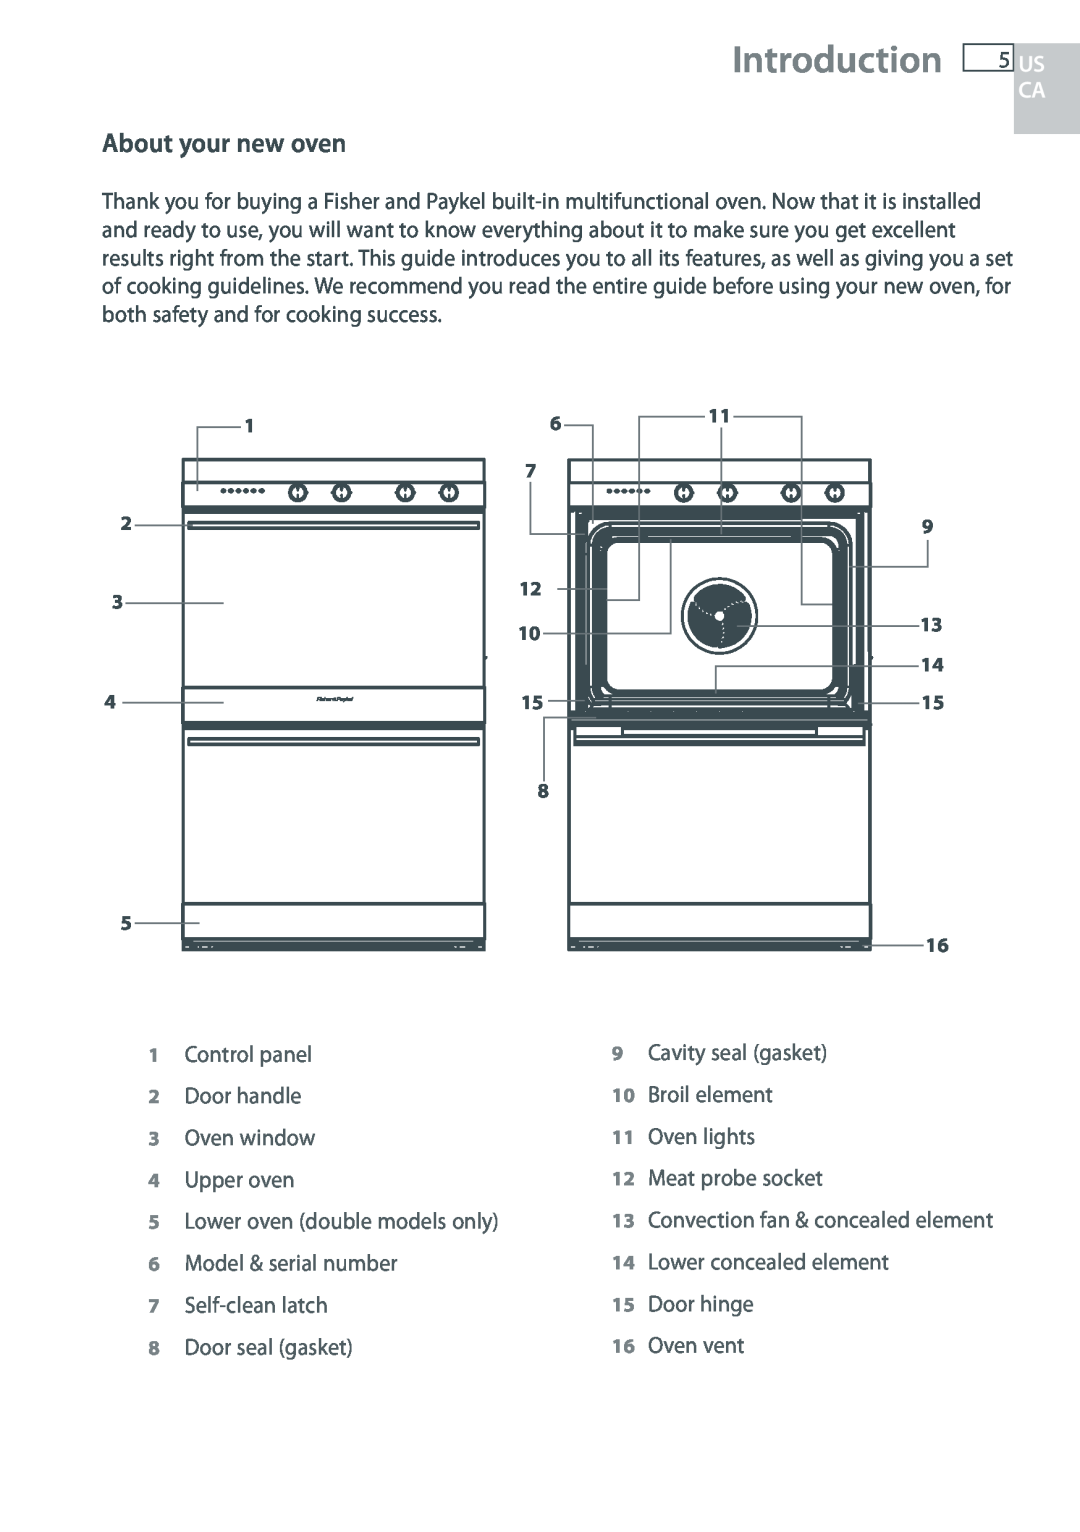 Fisher & Paykel OB30 manual Introduction, About your new oven, Us Ca 